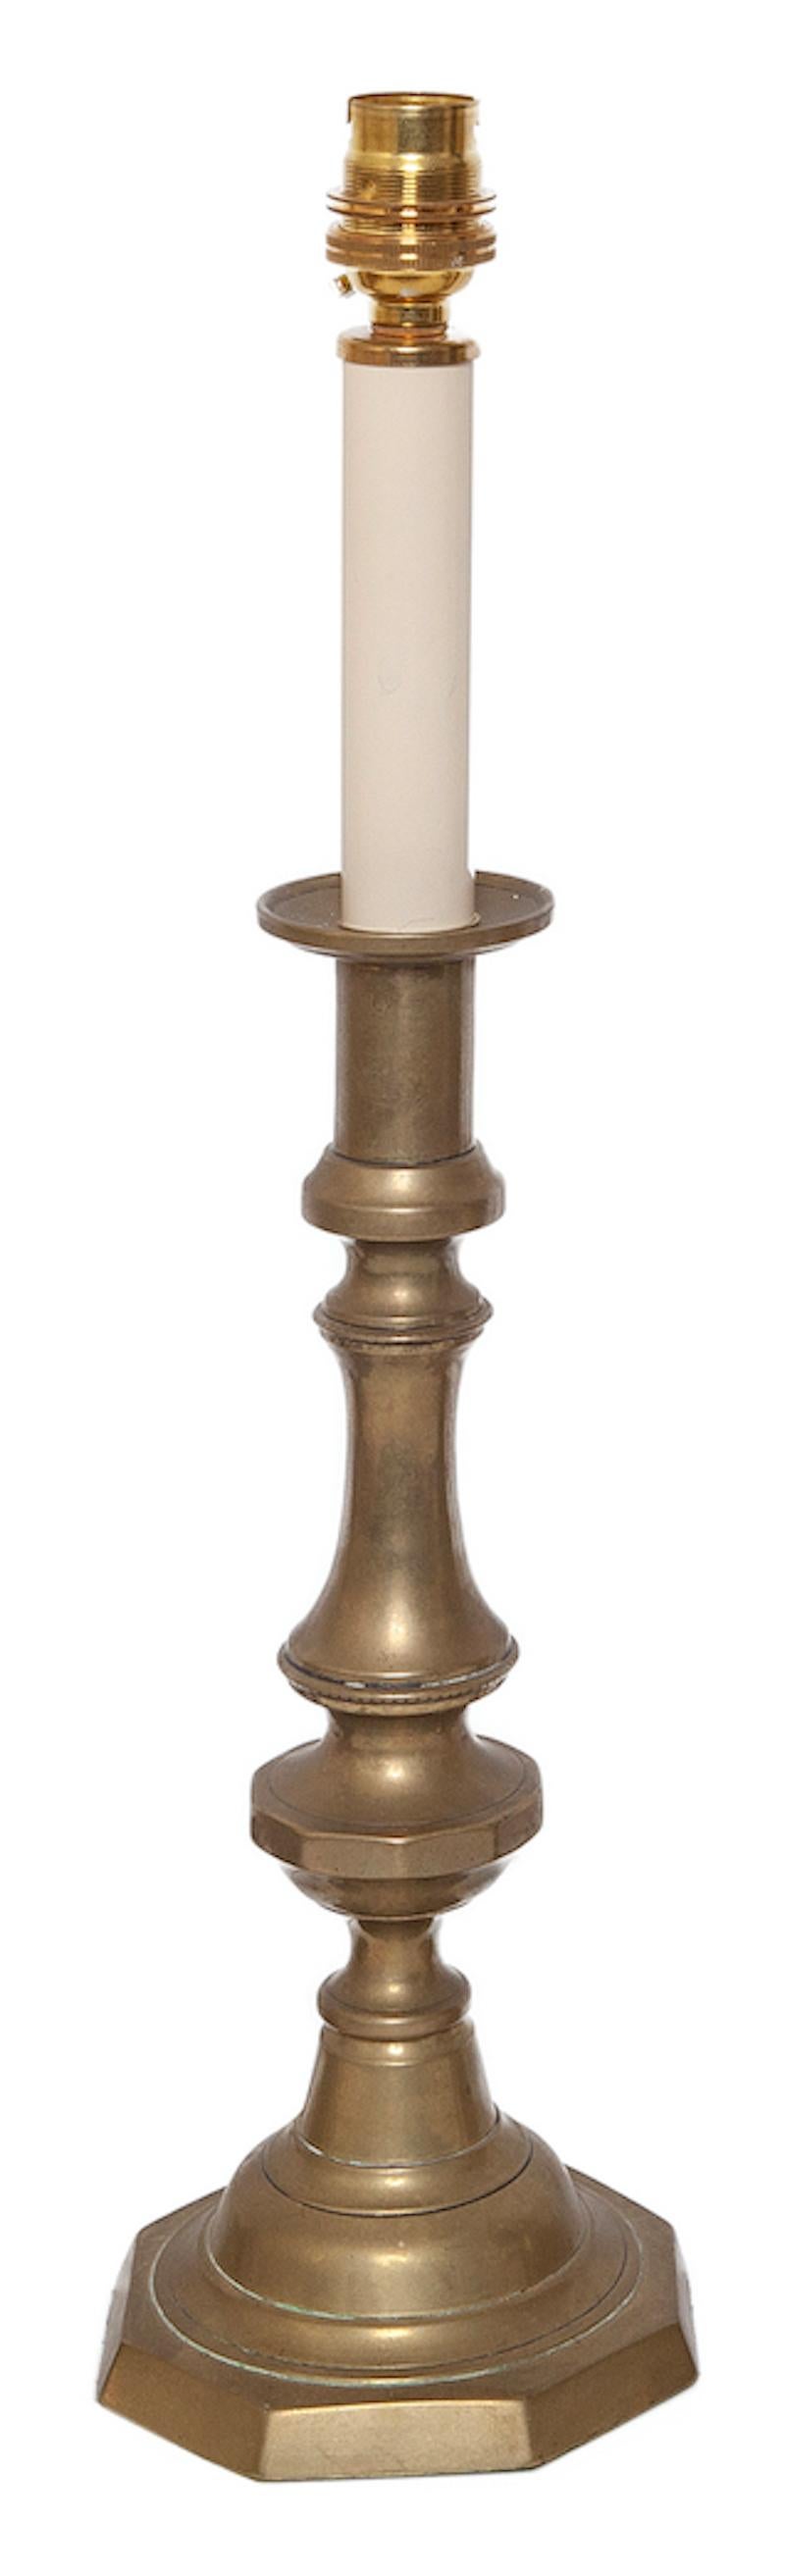 English Table Lamp Candlesticks Pair Brass Turned For Sale